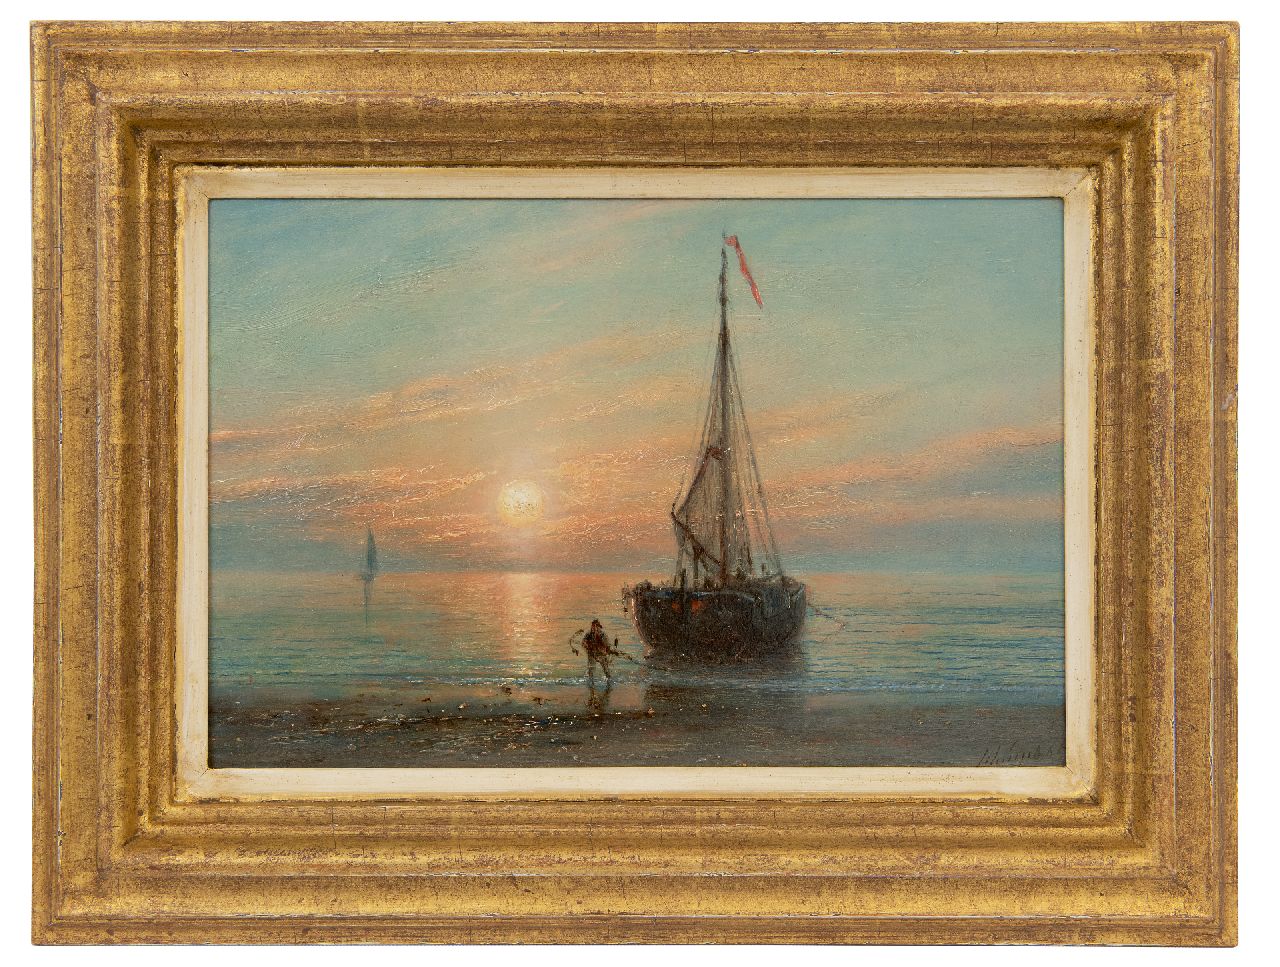 Schiedges P.P.  | Petrus Paulus Schiedges | Paintings offered for sale | Returned fishing boat at sunset, oil on panel 18.7 x 27.9 cm, signed l.r. and dated '65